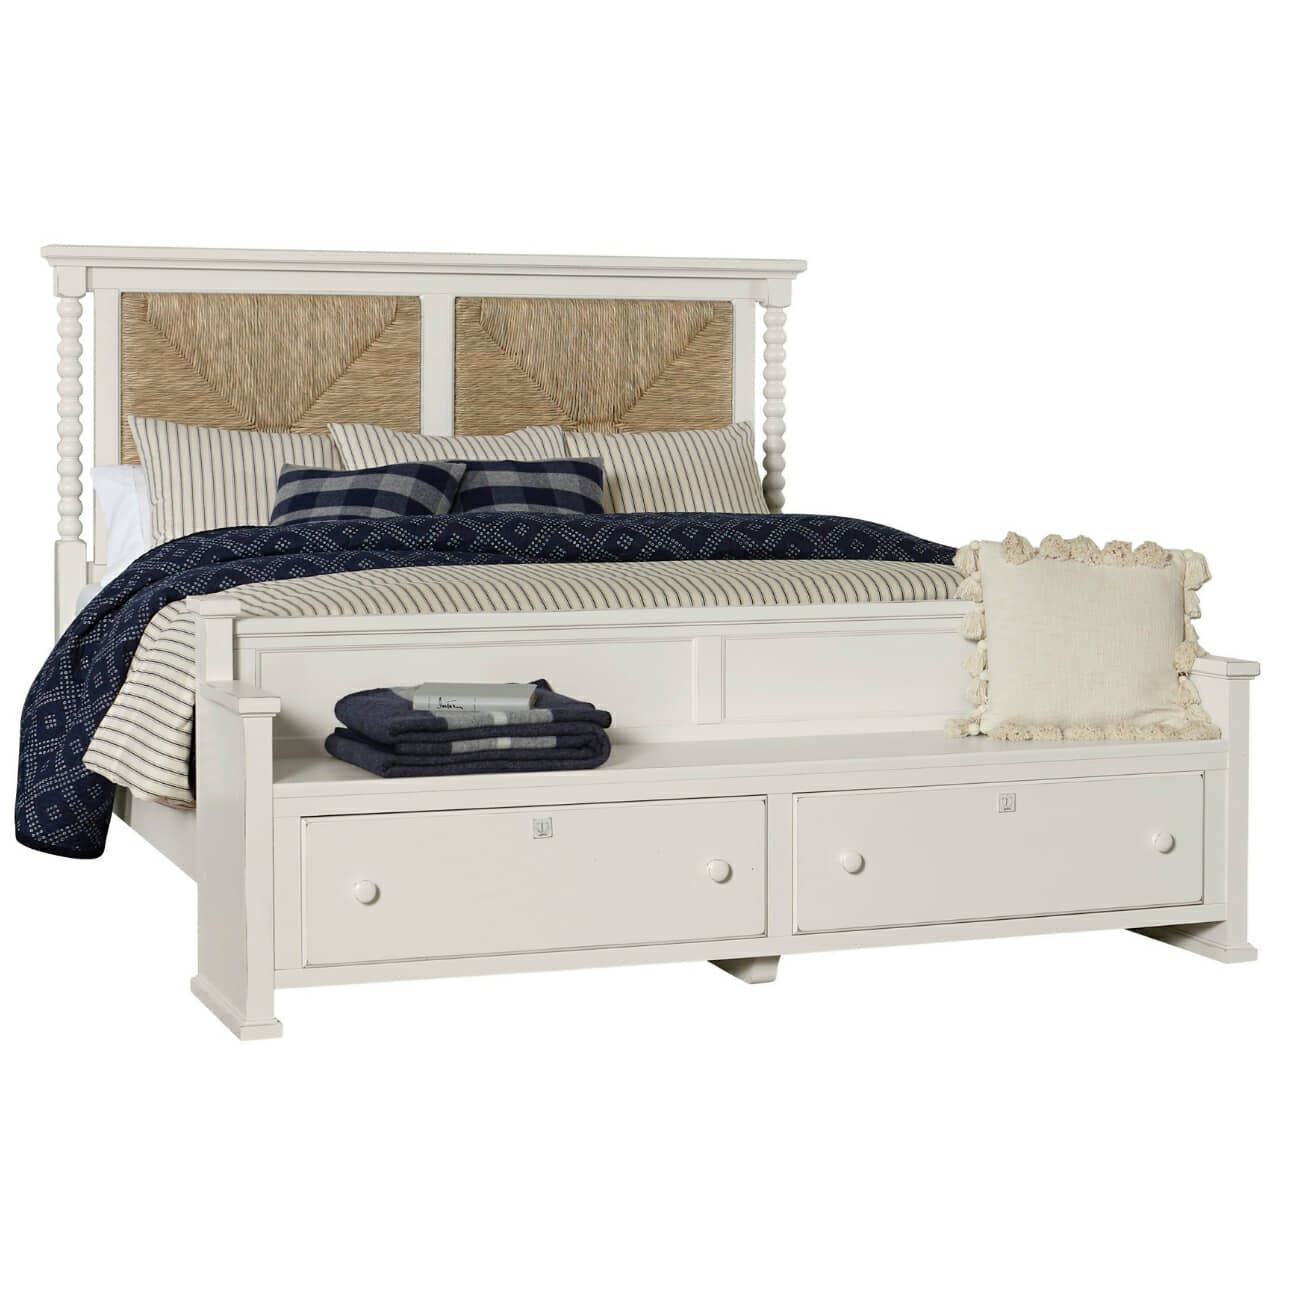 Scotsman Co American Heirloom Seagrass Bed With Bench Storage Footboard throughout proportions 1300 X 1300